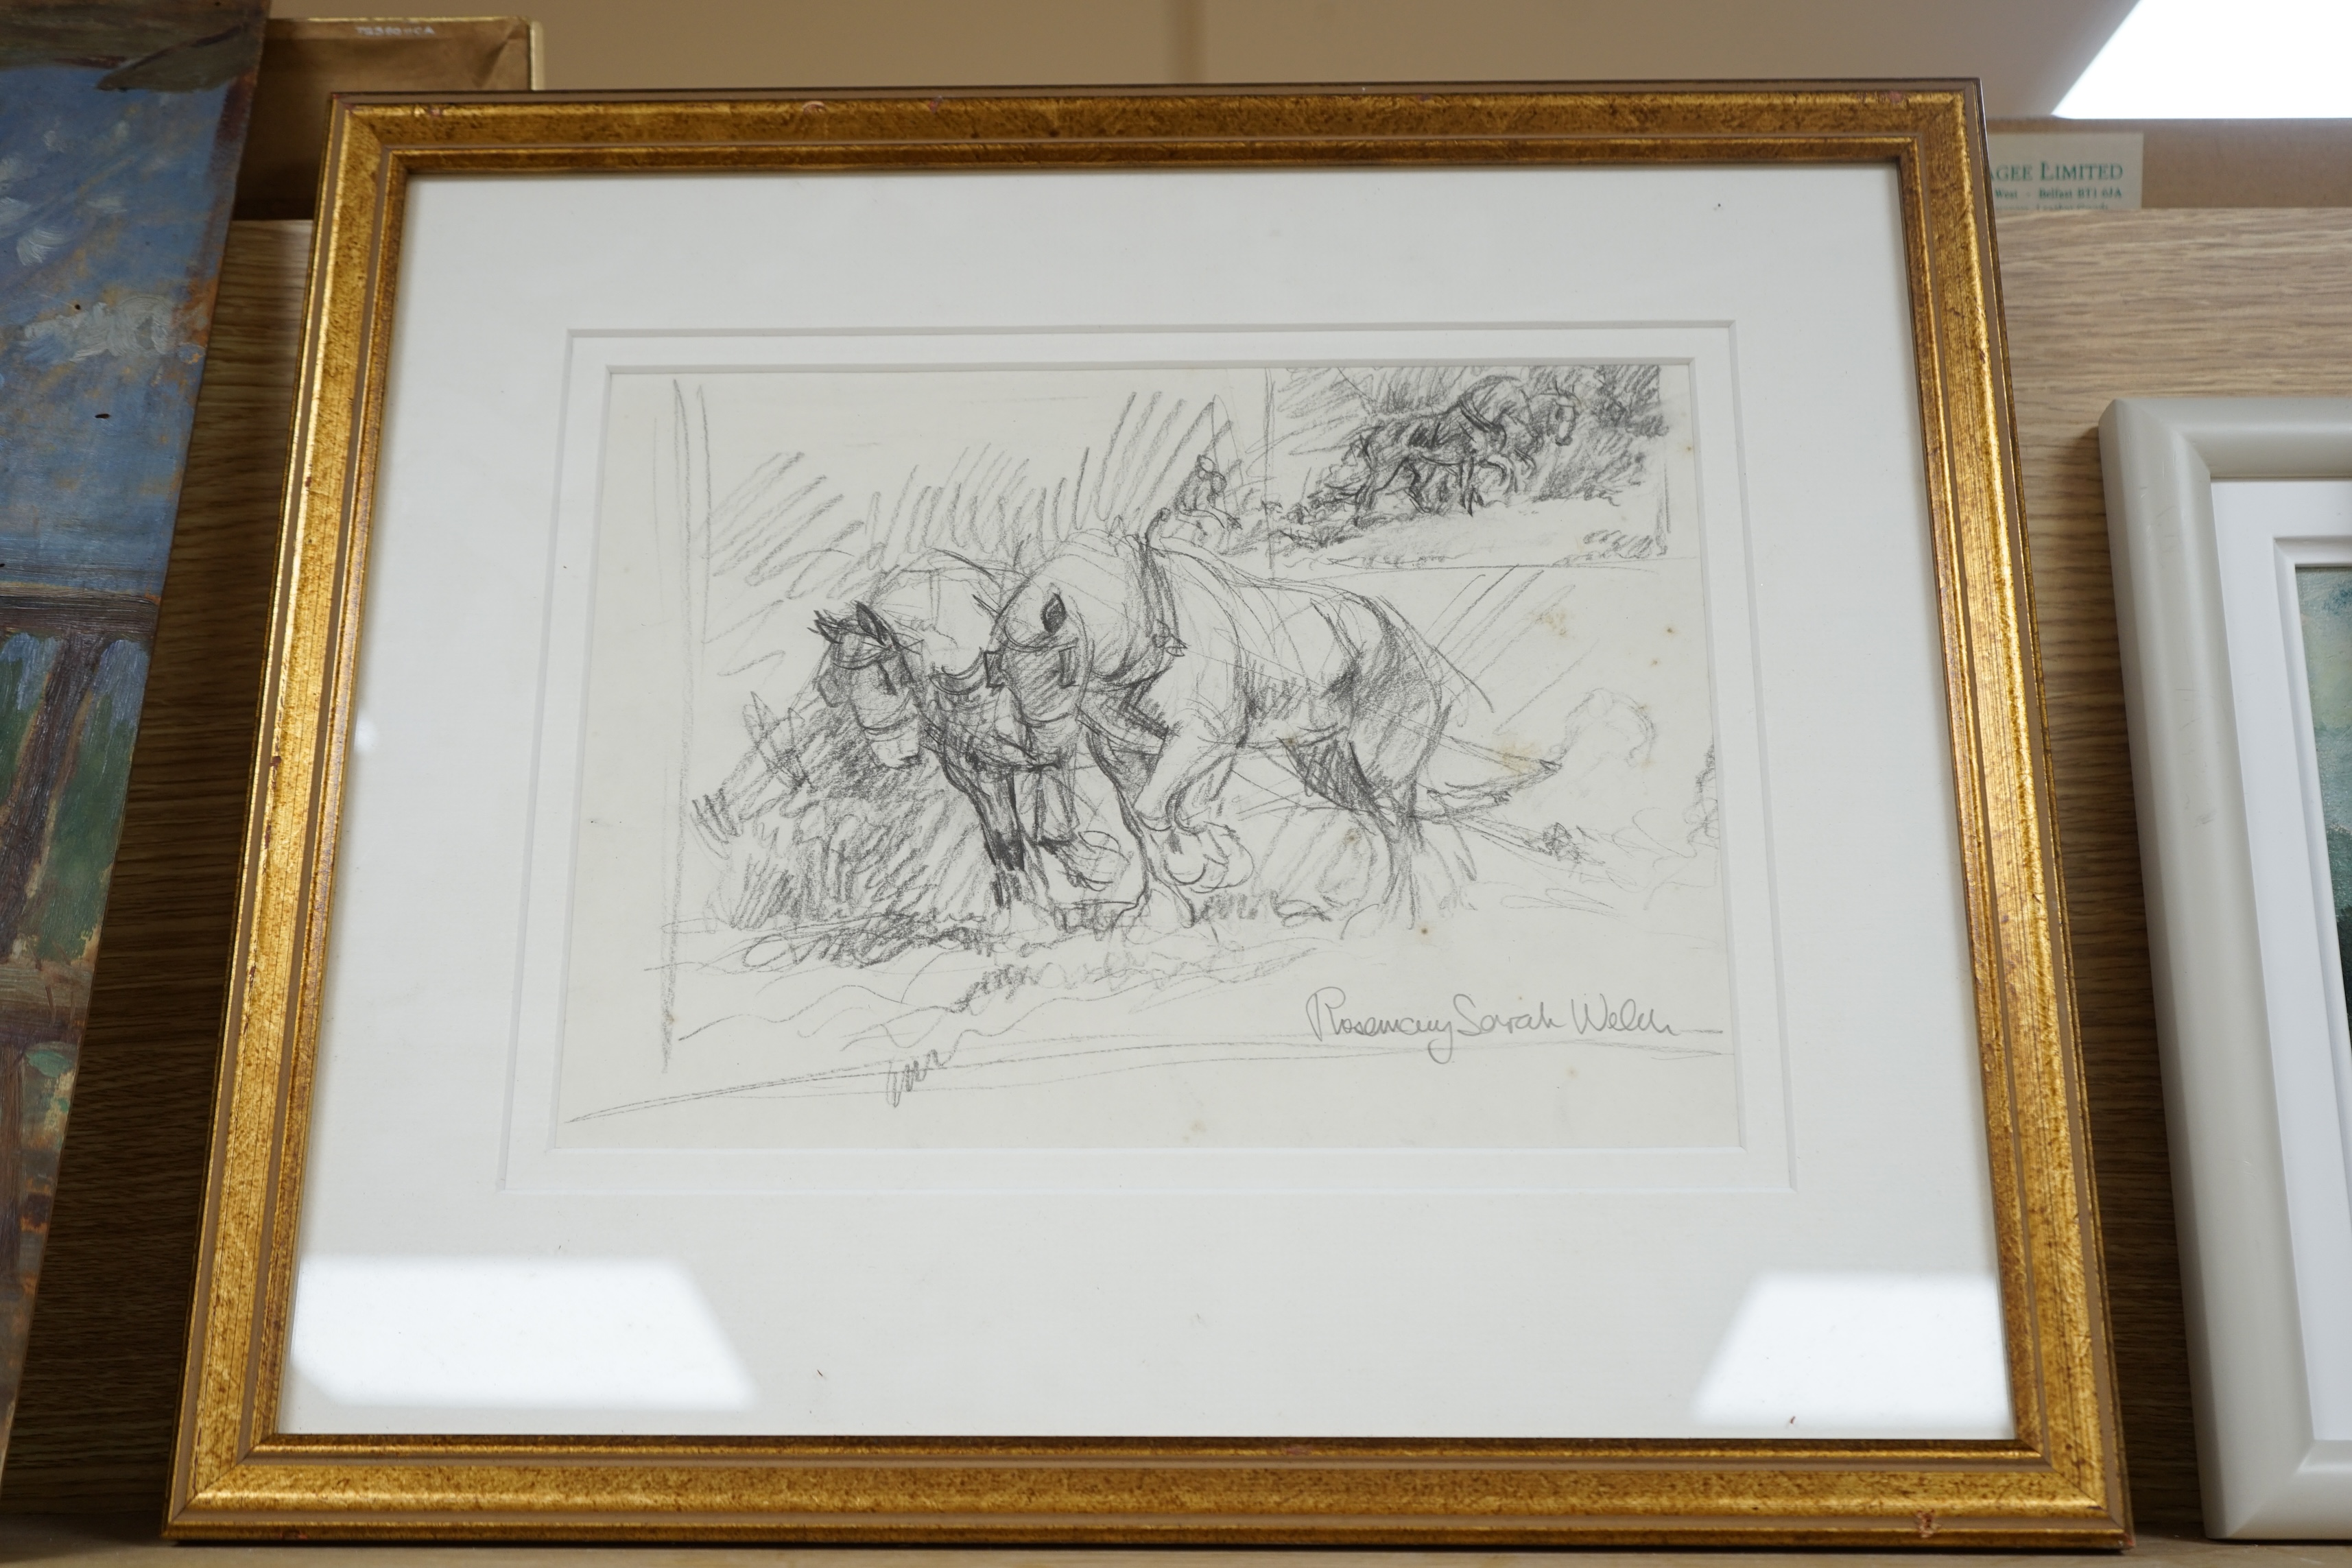 Rosemary Sarah Welch (b.1946), pencil sketch, Study of work horses ploughing, signed, 20 x 27cm. Condition - poor to fair